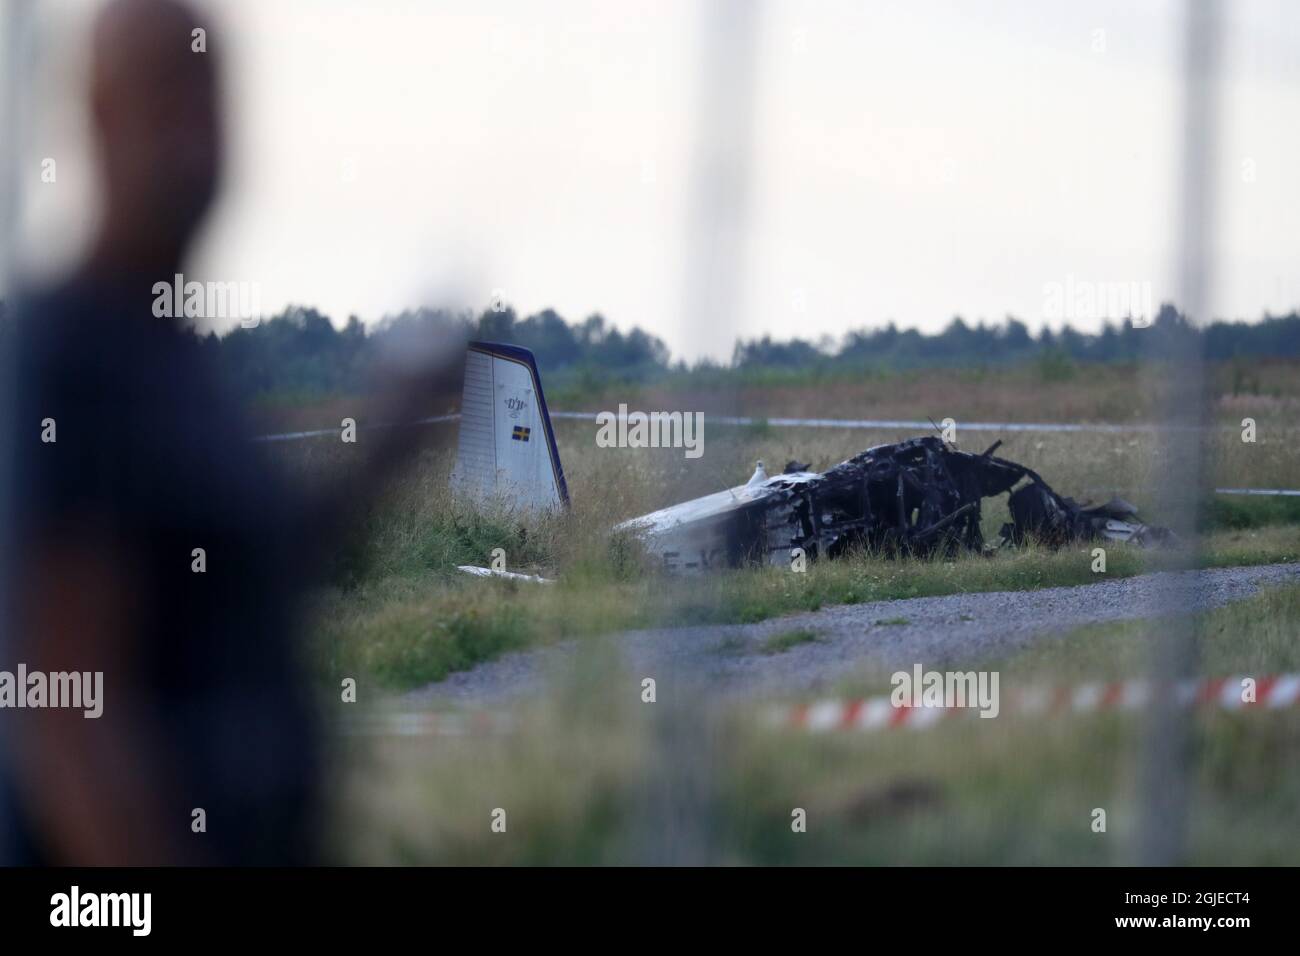 A smal airkraft has crashed at Orebro Airport in Sweden July 8 2021. The airplane was used by the local parachute club with nine people on board. According to the police several people have died in the plane crash Photo: Jeppe Gustafsson/TT Kod 71500  Stock Photo